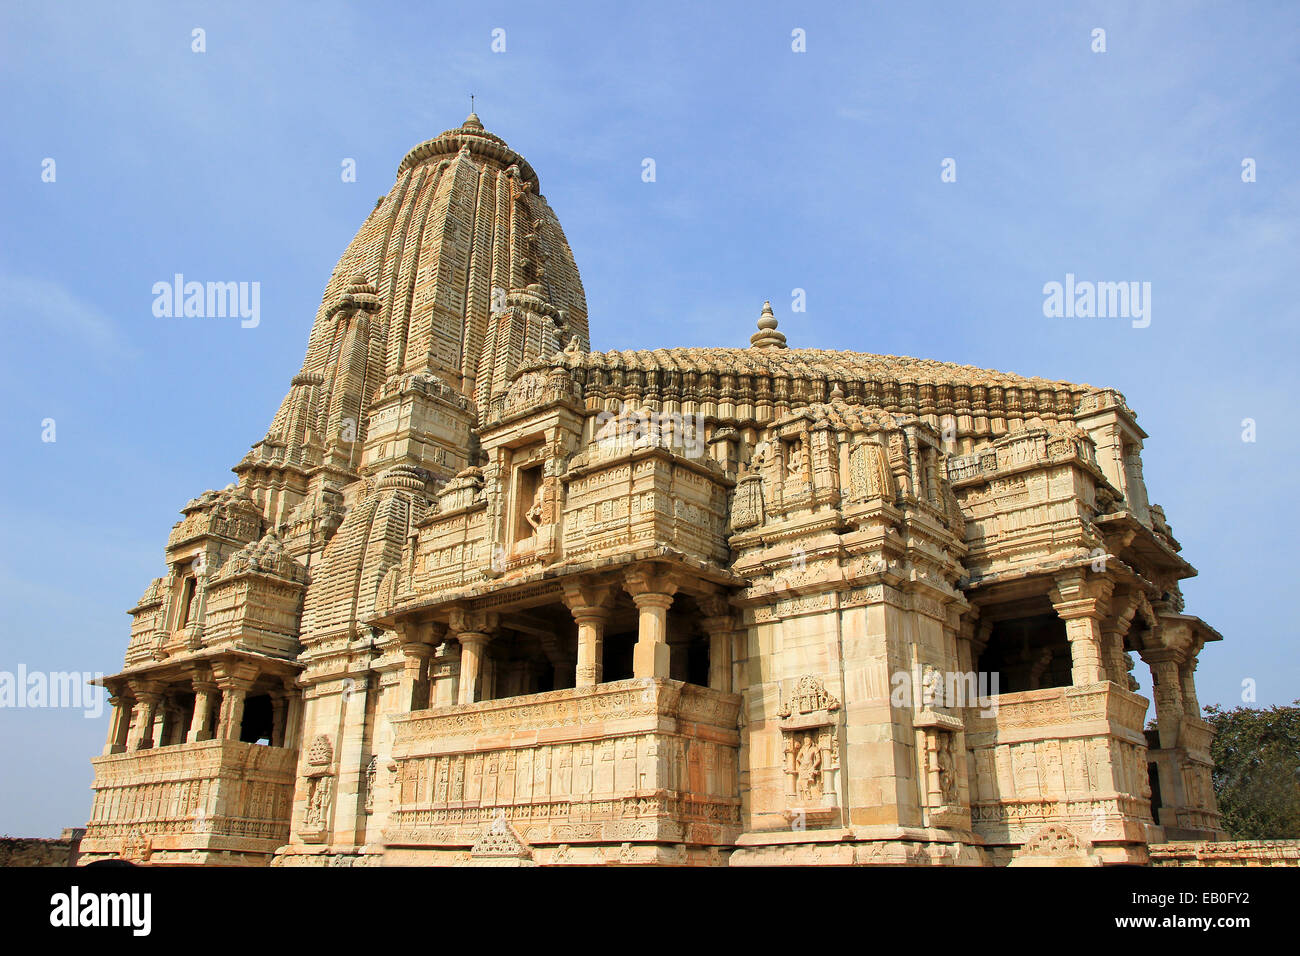 Architecturally beautiful Kumbha Shyam Temple in the vicinity of Vijay Sthambh (Victory Tower), Chittorgarh Fort, Rajasthan, Ind Stock Photo